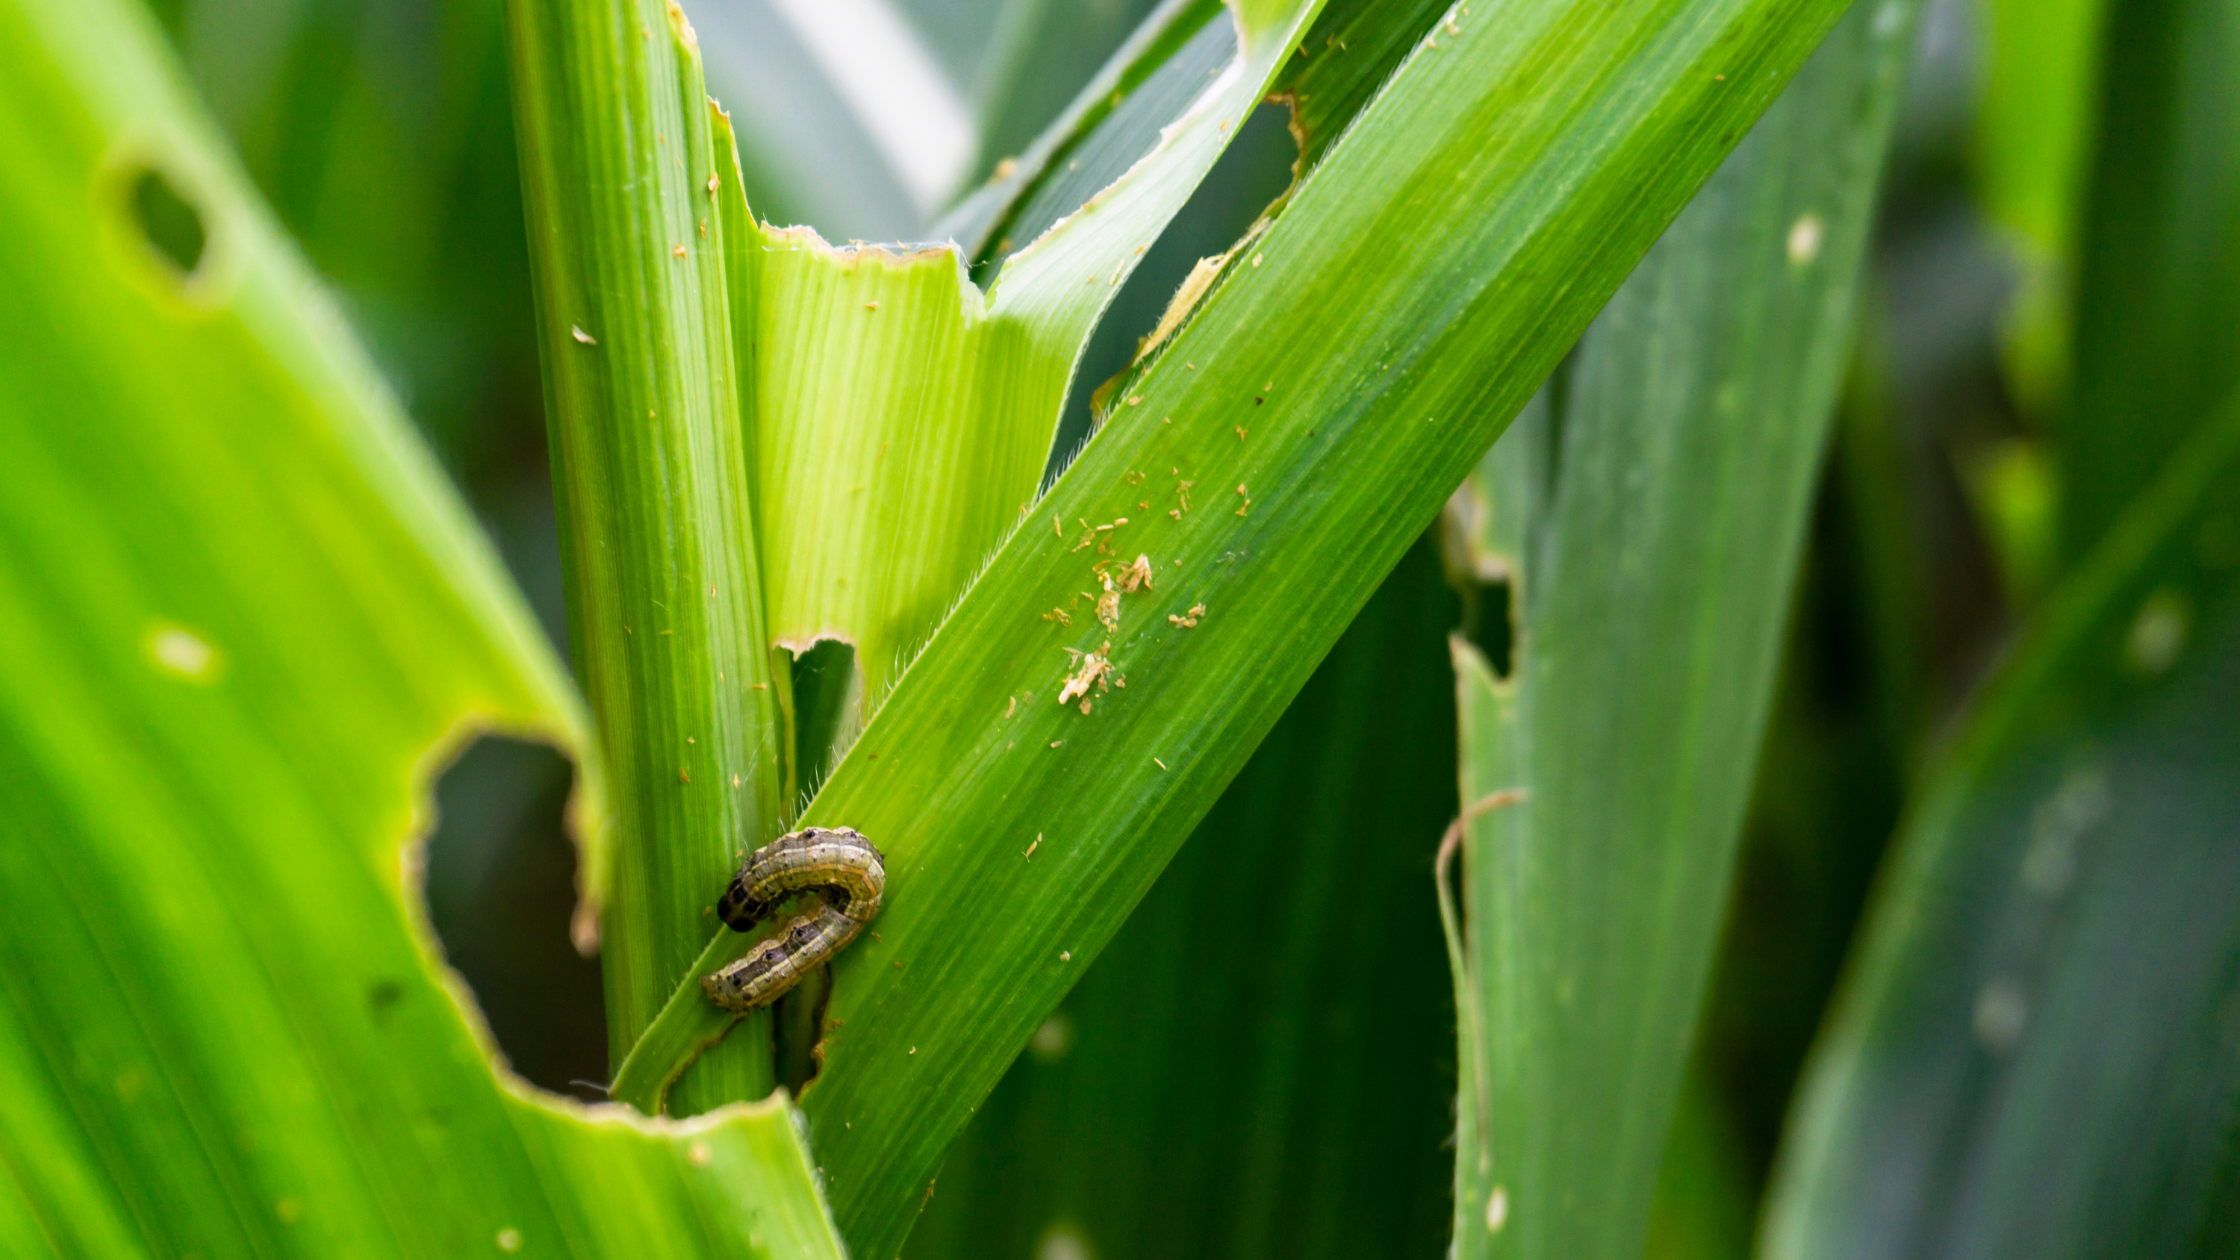 armyworms, pests, lawn, lawn care